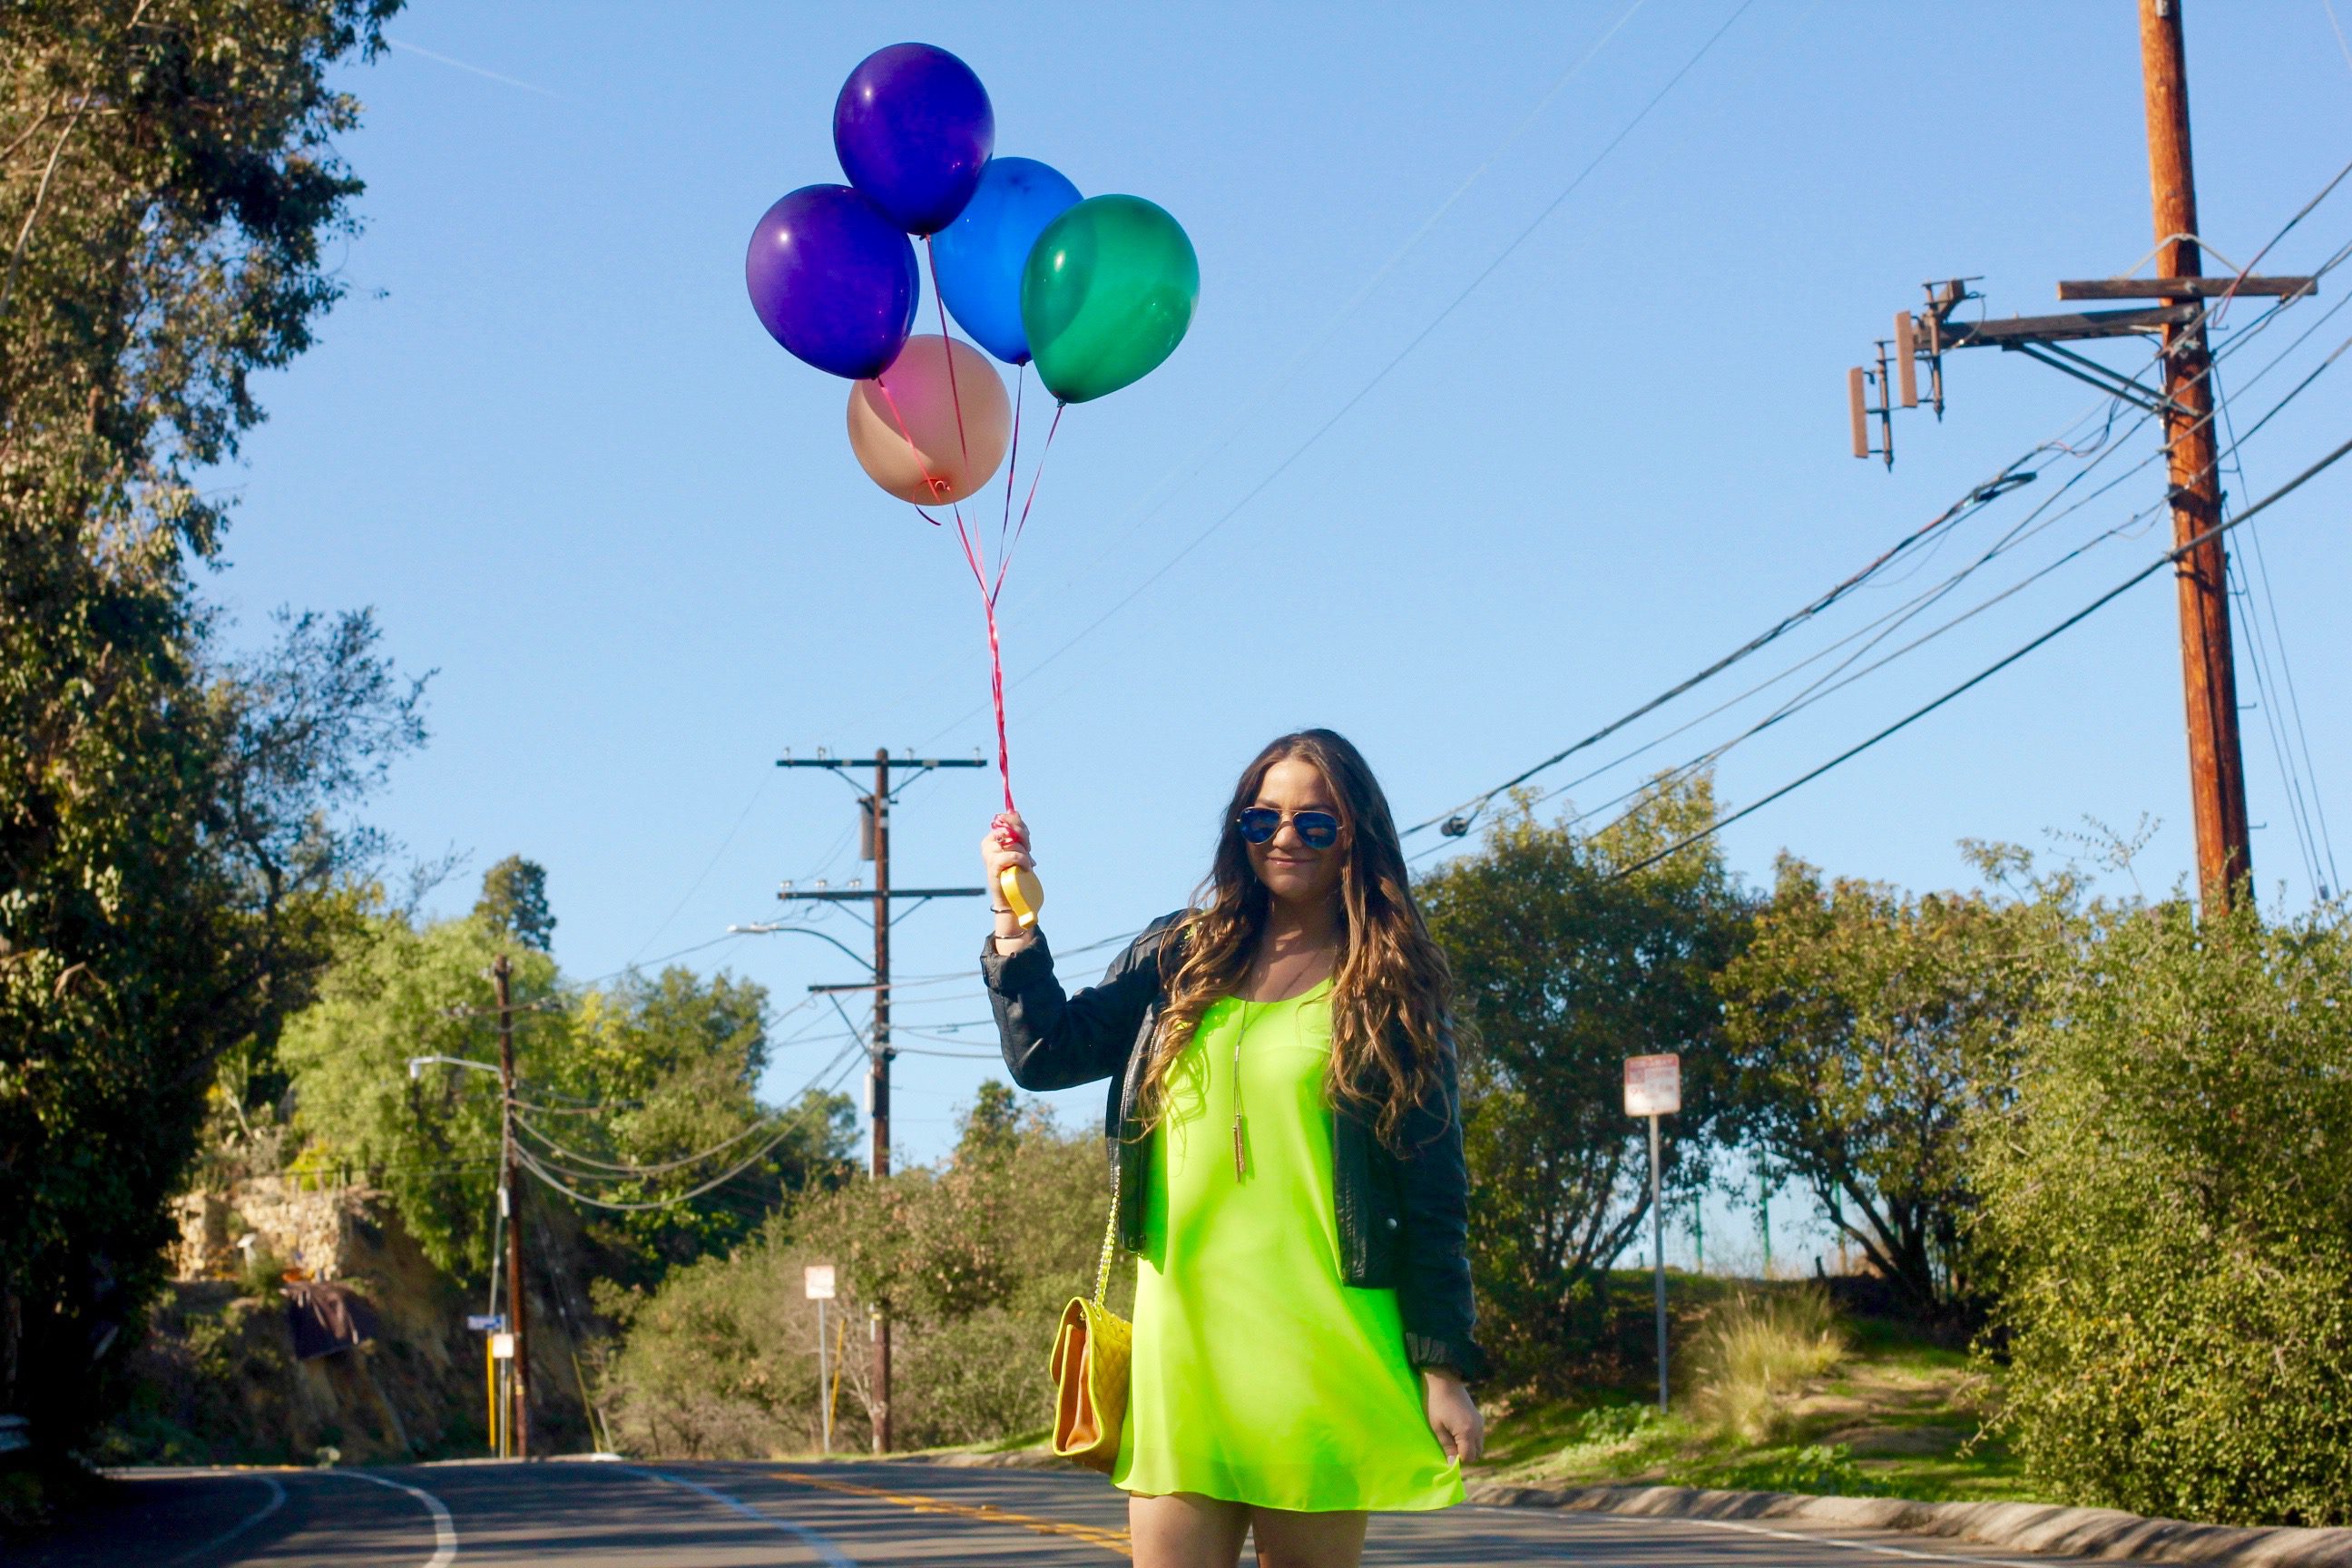 missyonmadison, melissa tierney, fashion blogger, fashion blogger, turning 24, birthday, birthday outfit, la blogger, neon dress, green neon dress, black moto jacket, leather jacket, leather motorcycle jacket, white pumps, white pointed toe pumps, brown quilted cross body bag, rebecca minkoff affair bag, tan quilted cross body bag, ray bans, blue mirrored ray bans, gold cuff bracelet, gold lariat necklace, universal city overlook, balloons, birthday girl, brunette hair,